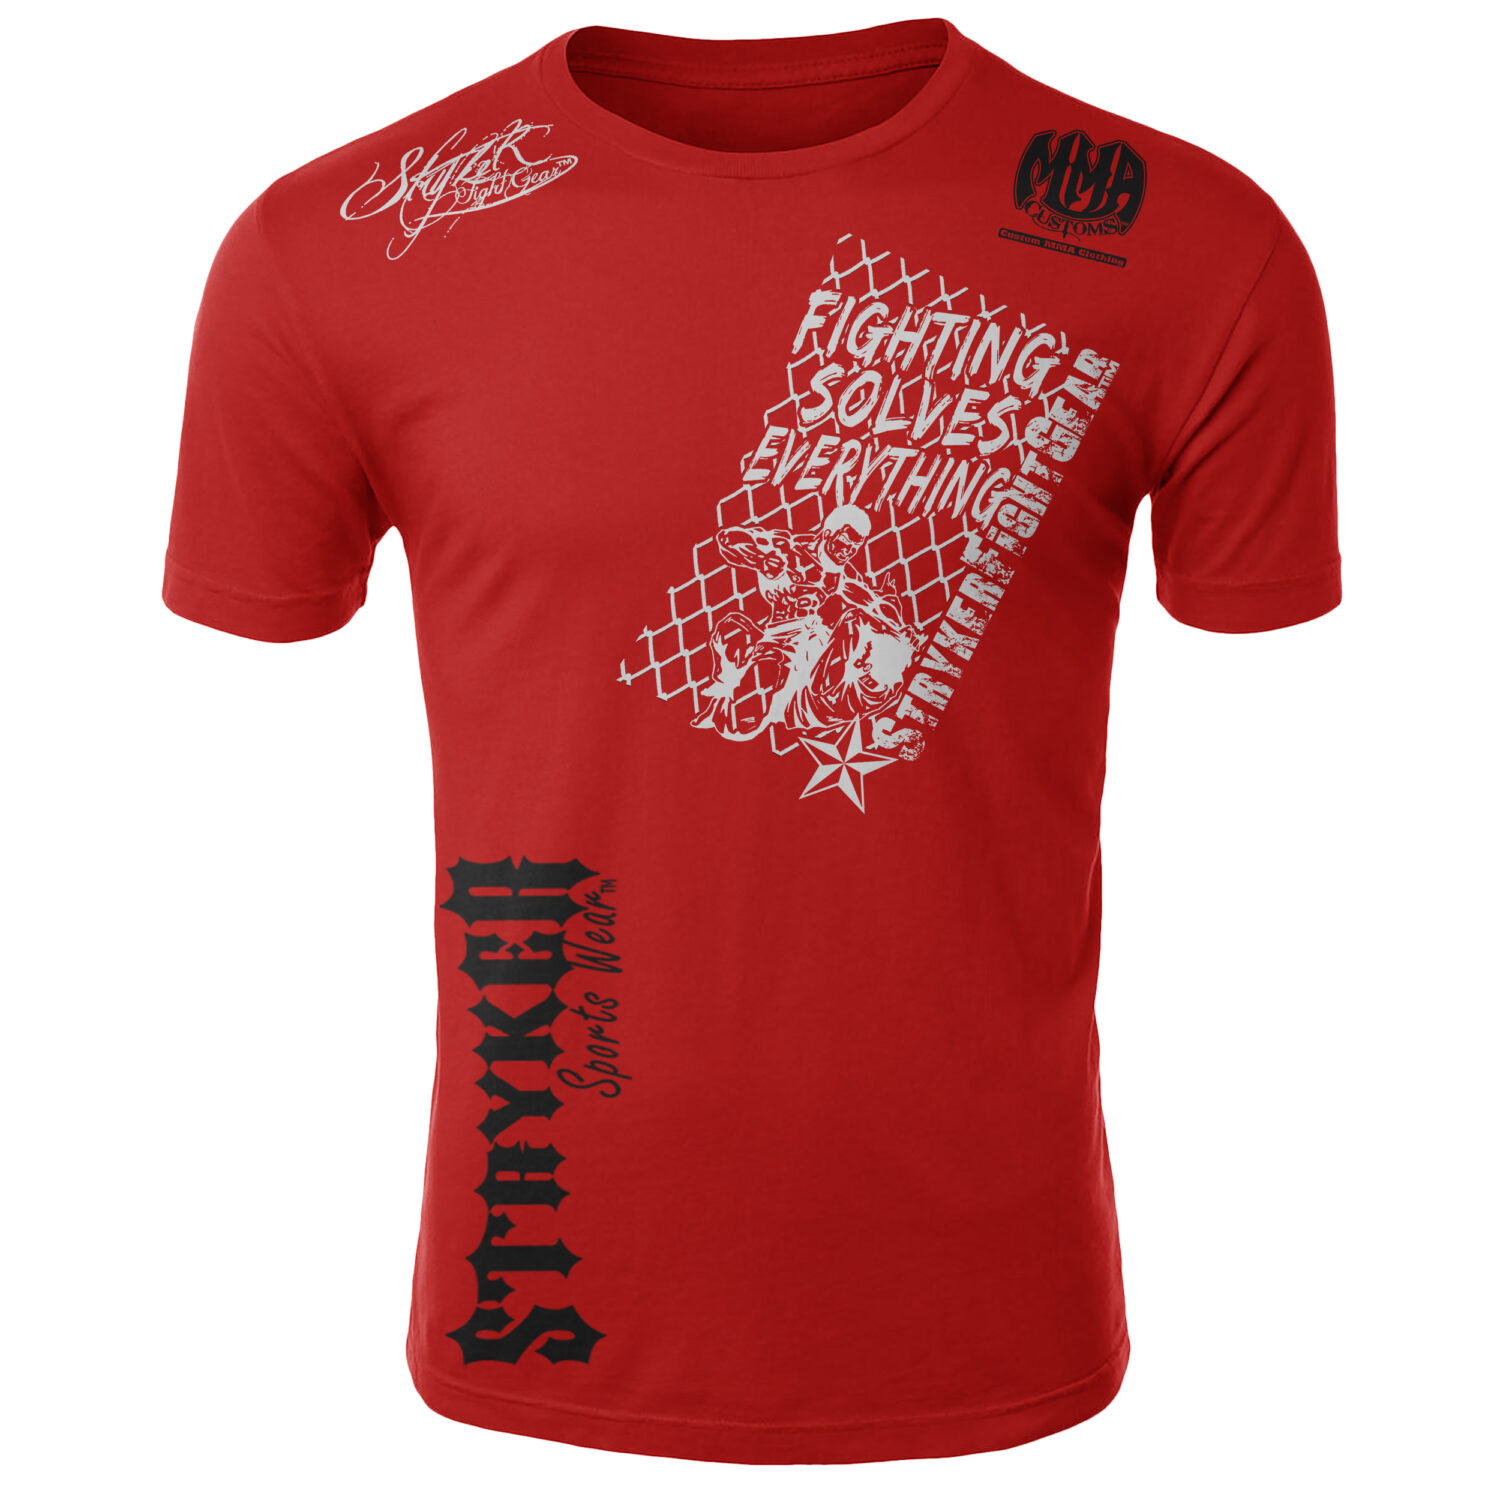 Stryker Fight Gear Fighting Solves Everything Adult MMA T - Shirt Red Black White Logos